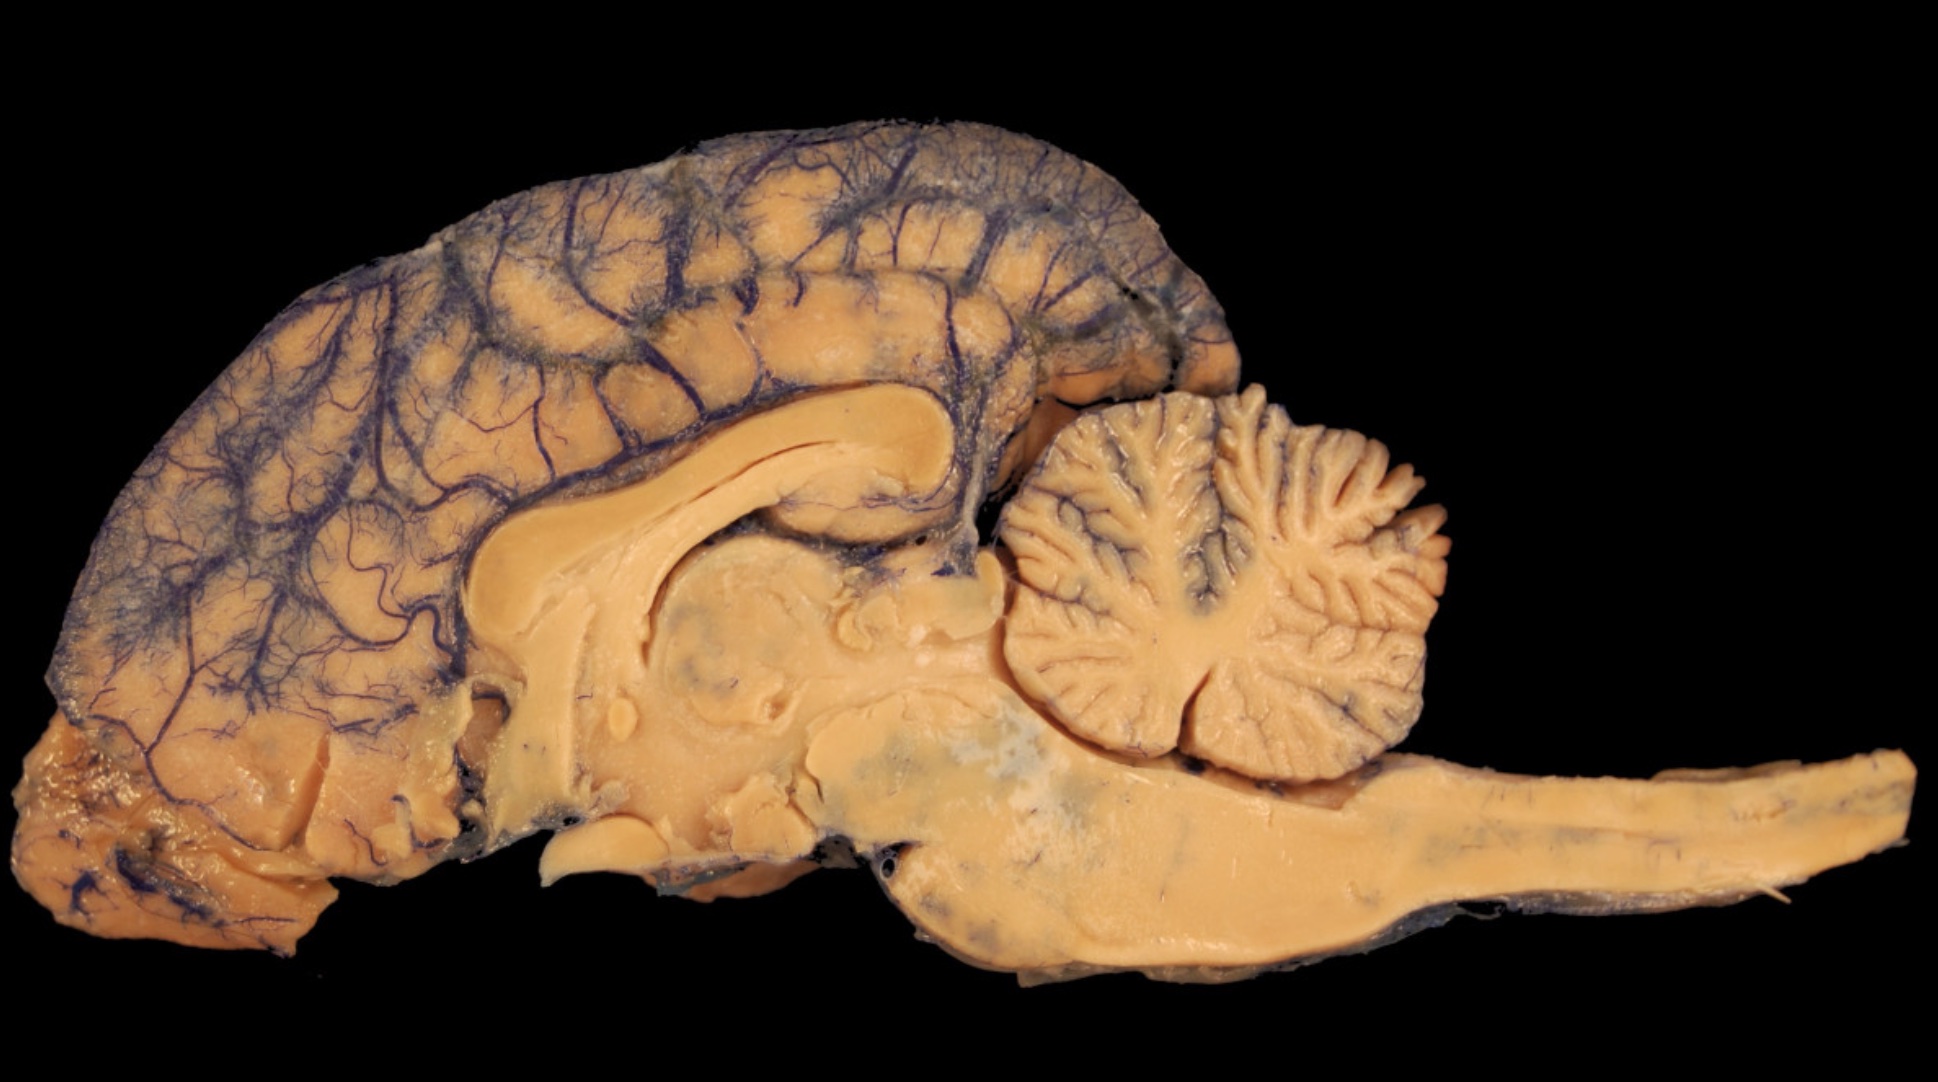 An image of a human brain on a black background.